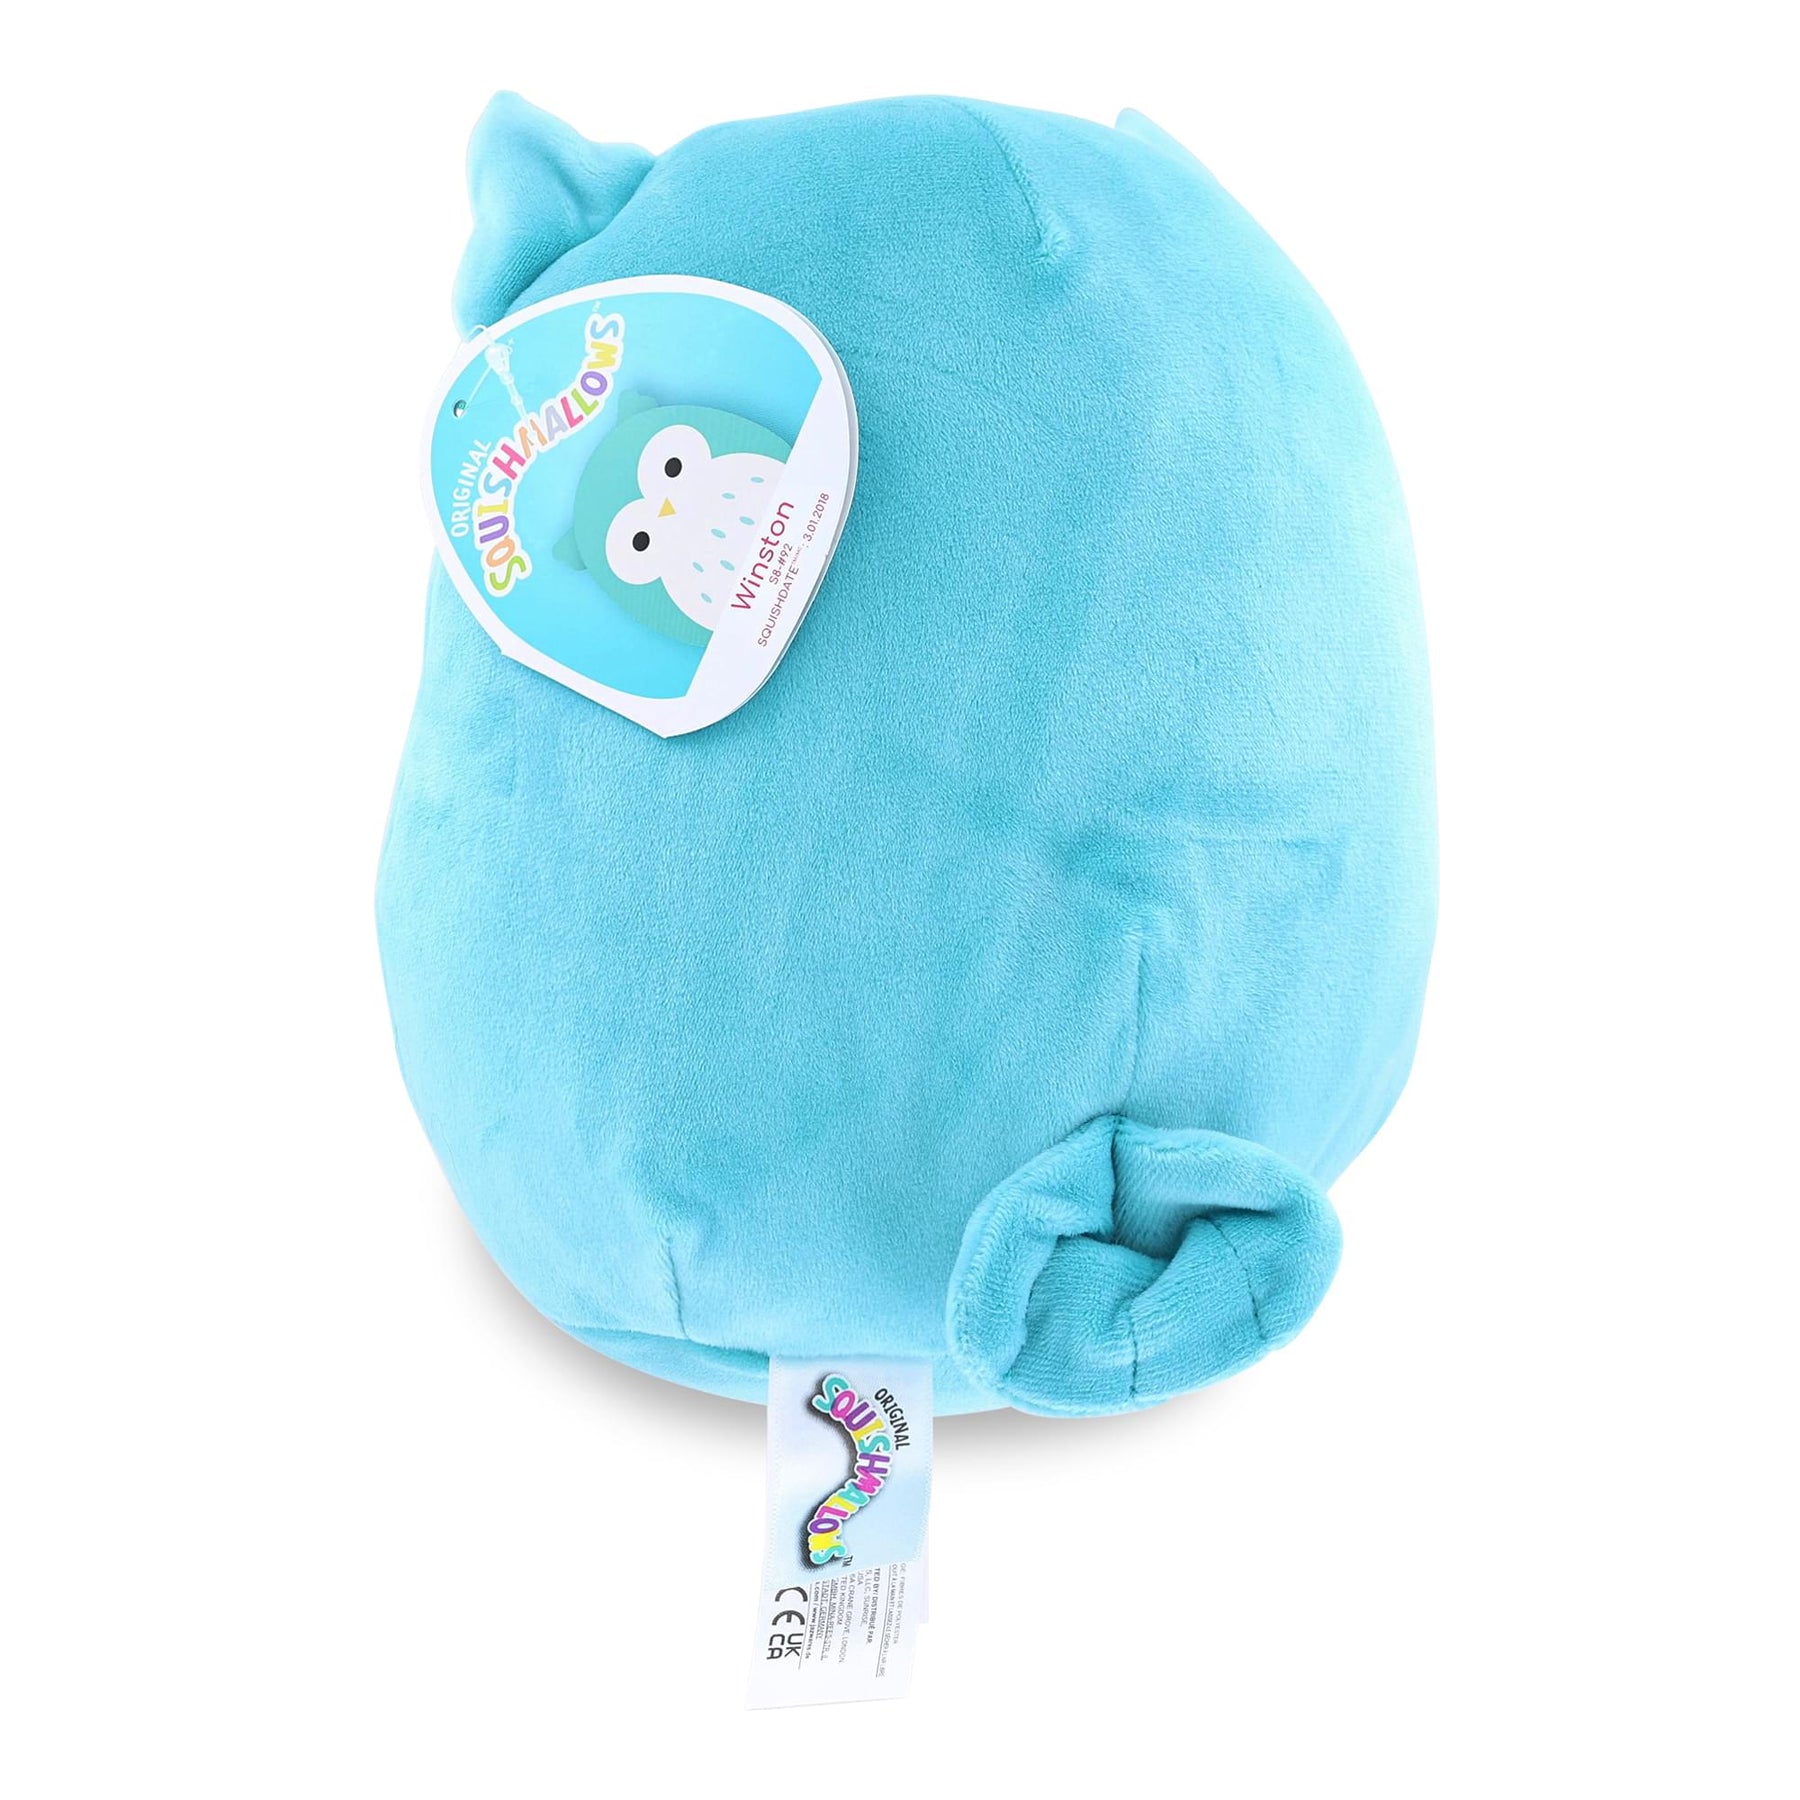 Squishmallow 8 Inch Plush | Winston the Teal Owl